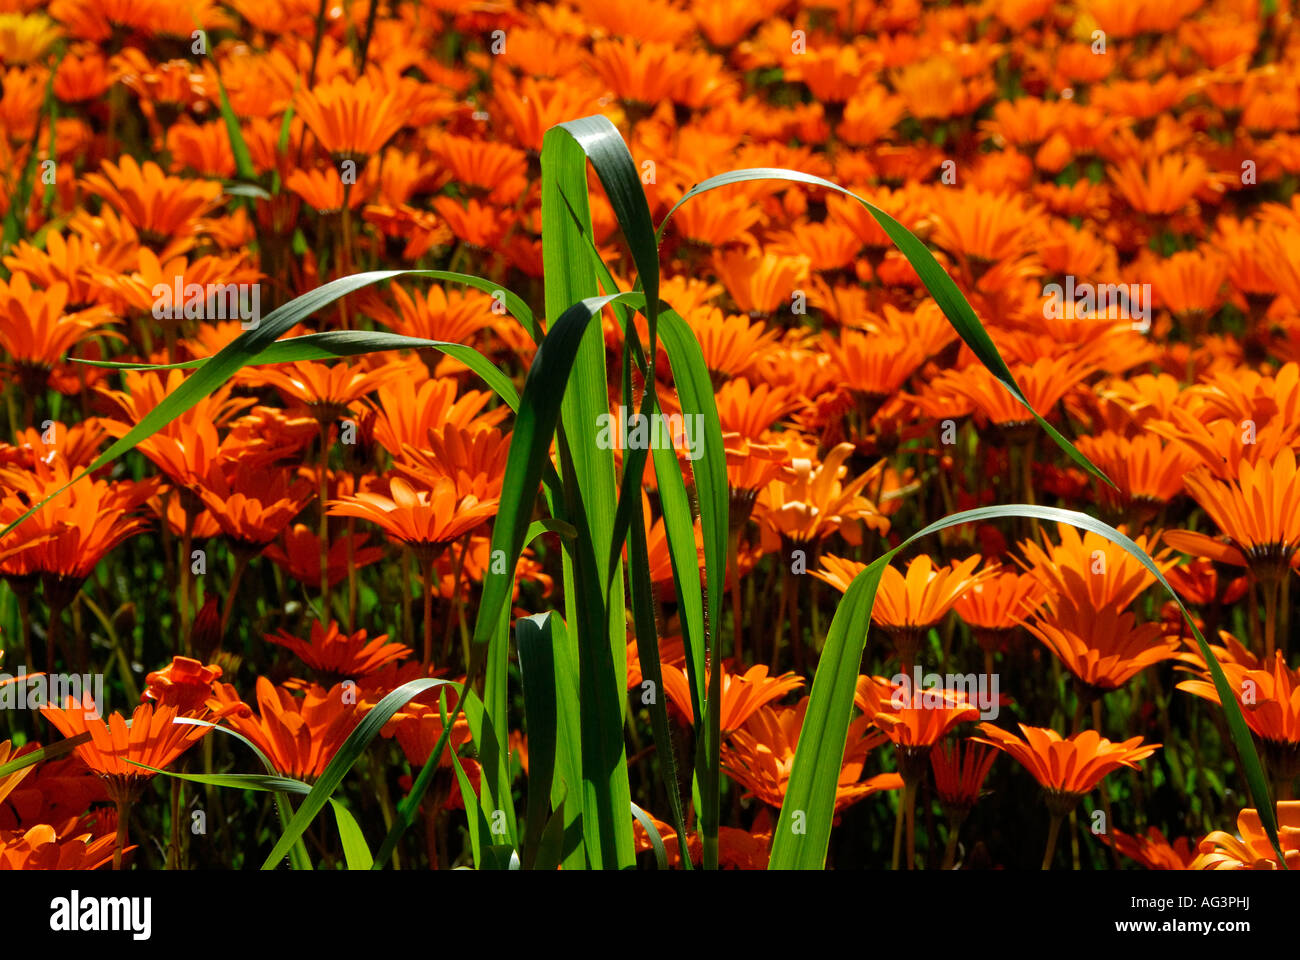 Fresh blades of green wheat growing against bright orange background of daisies, Clanwilliam, Western Cape, South Africa Stock Photo